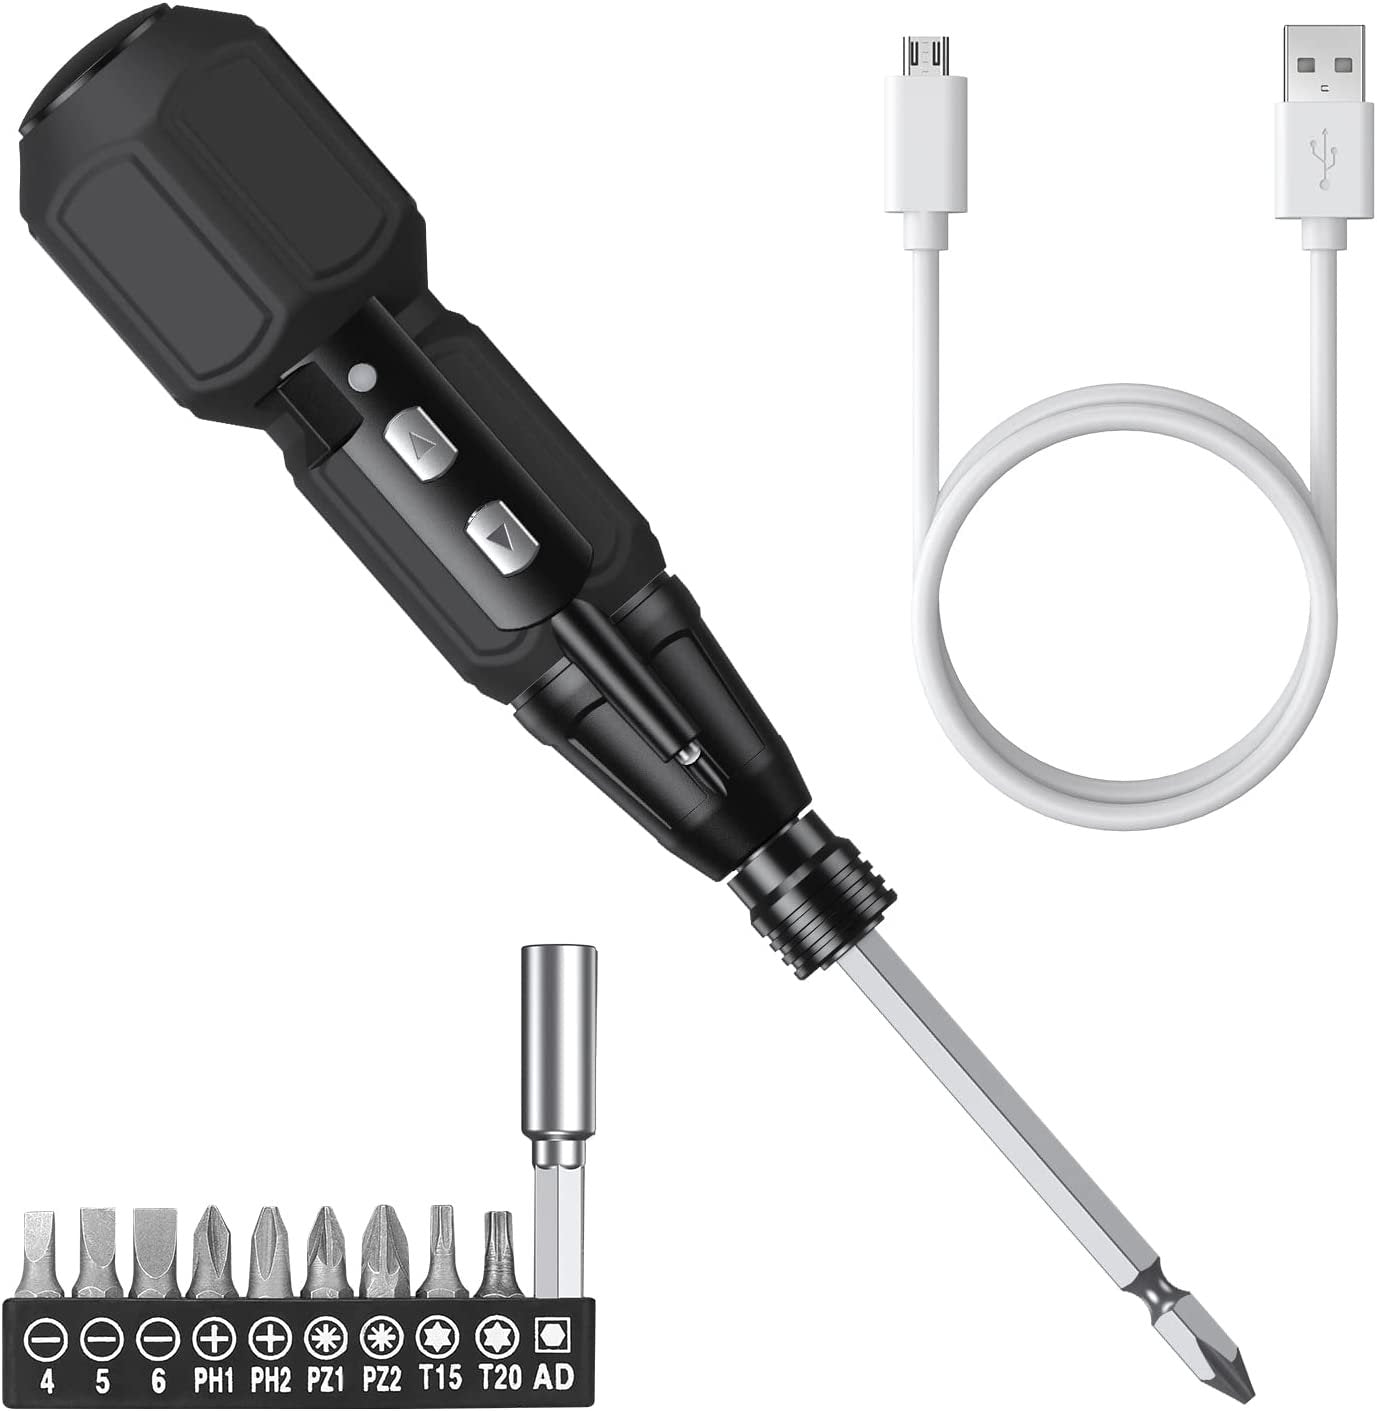 50% OFF | Eletwist Electric Screwdriver USB Rechargeable